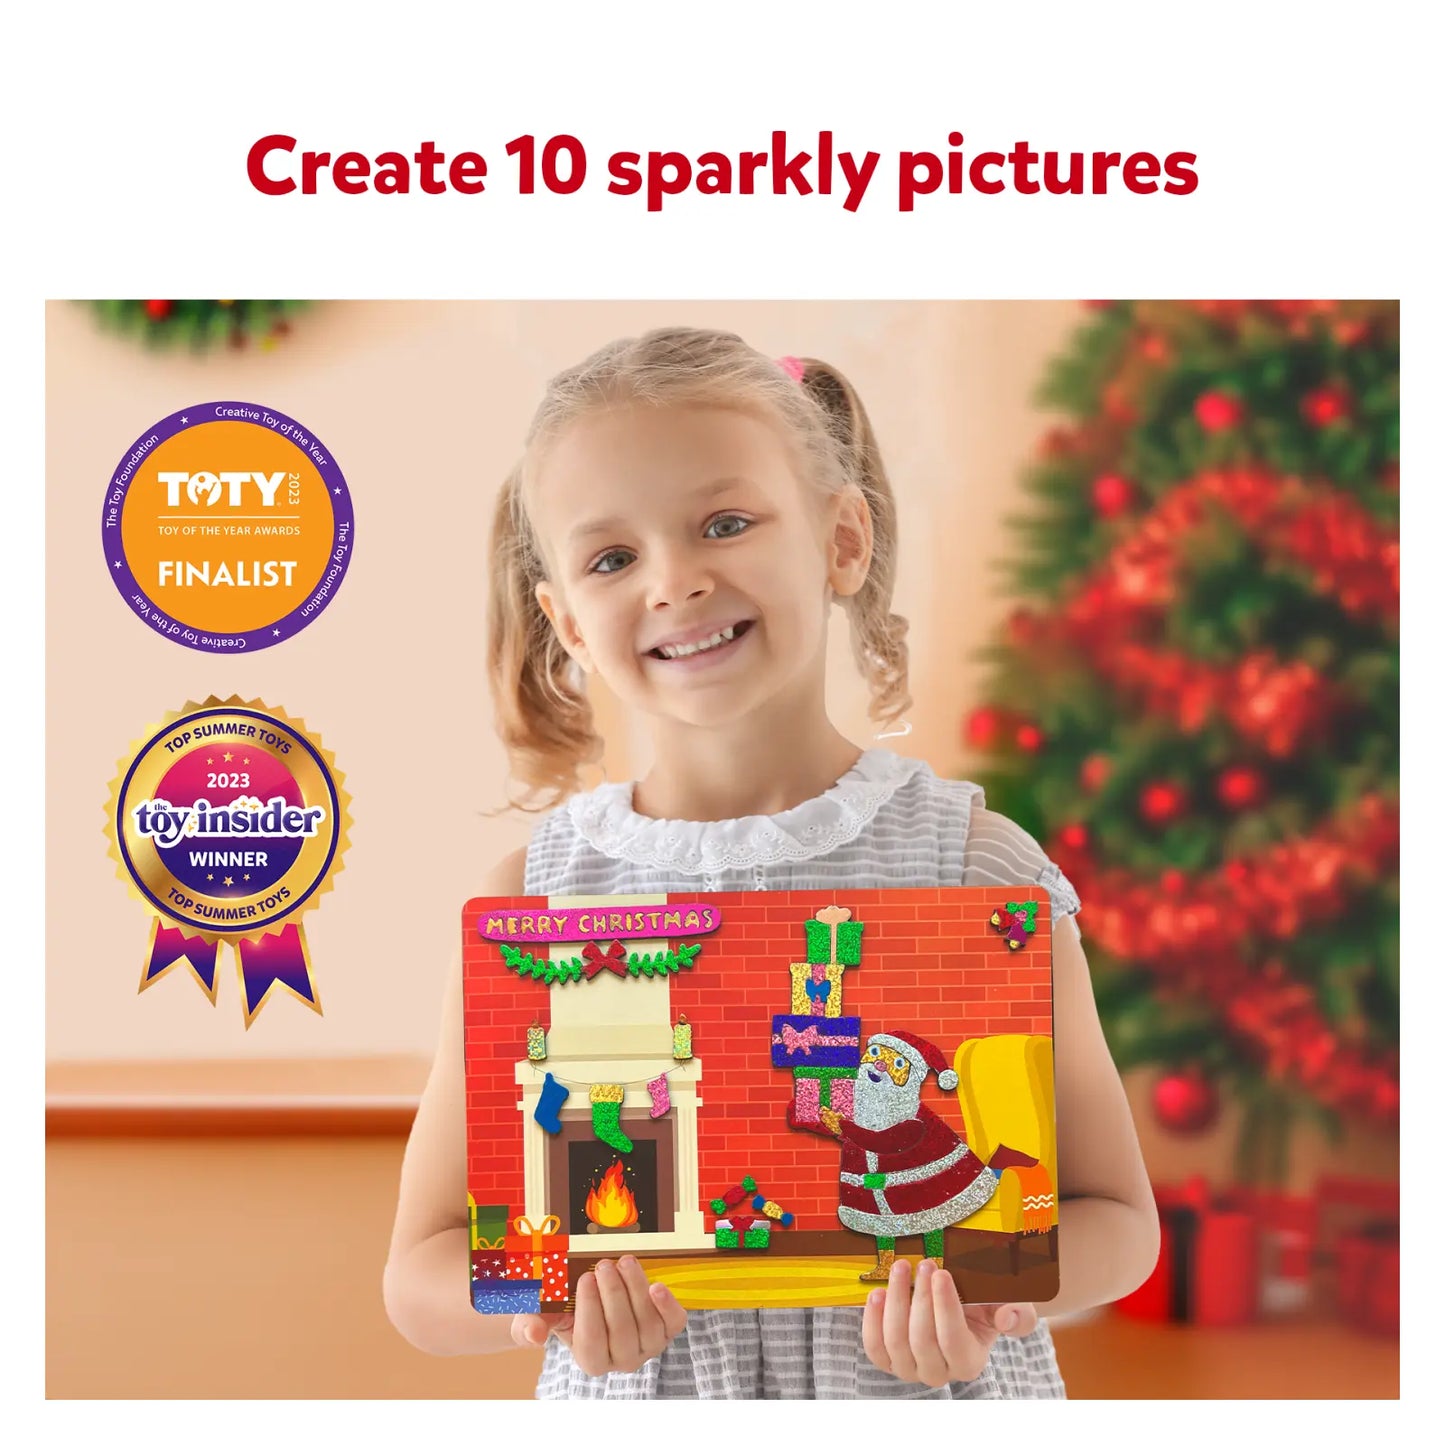 The Ultimate Art Kit (For ages 4-7)